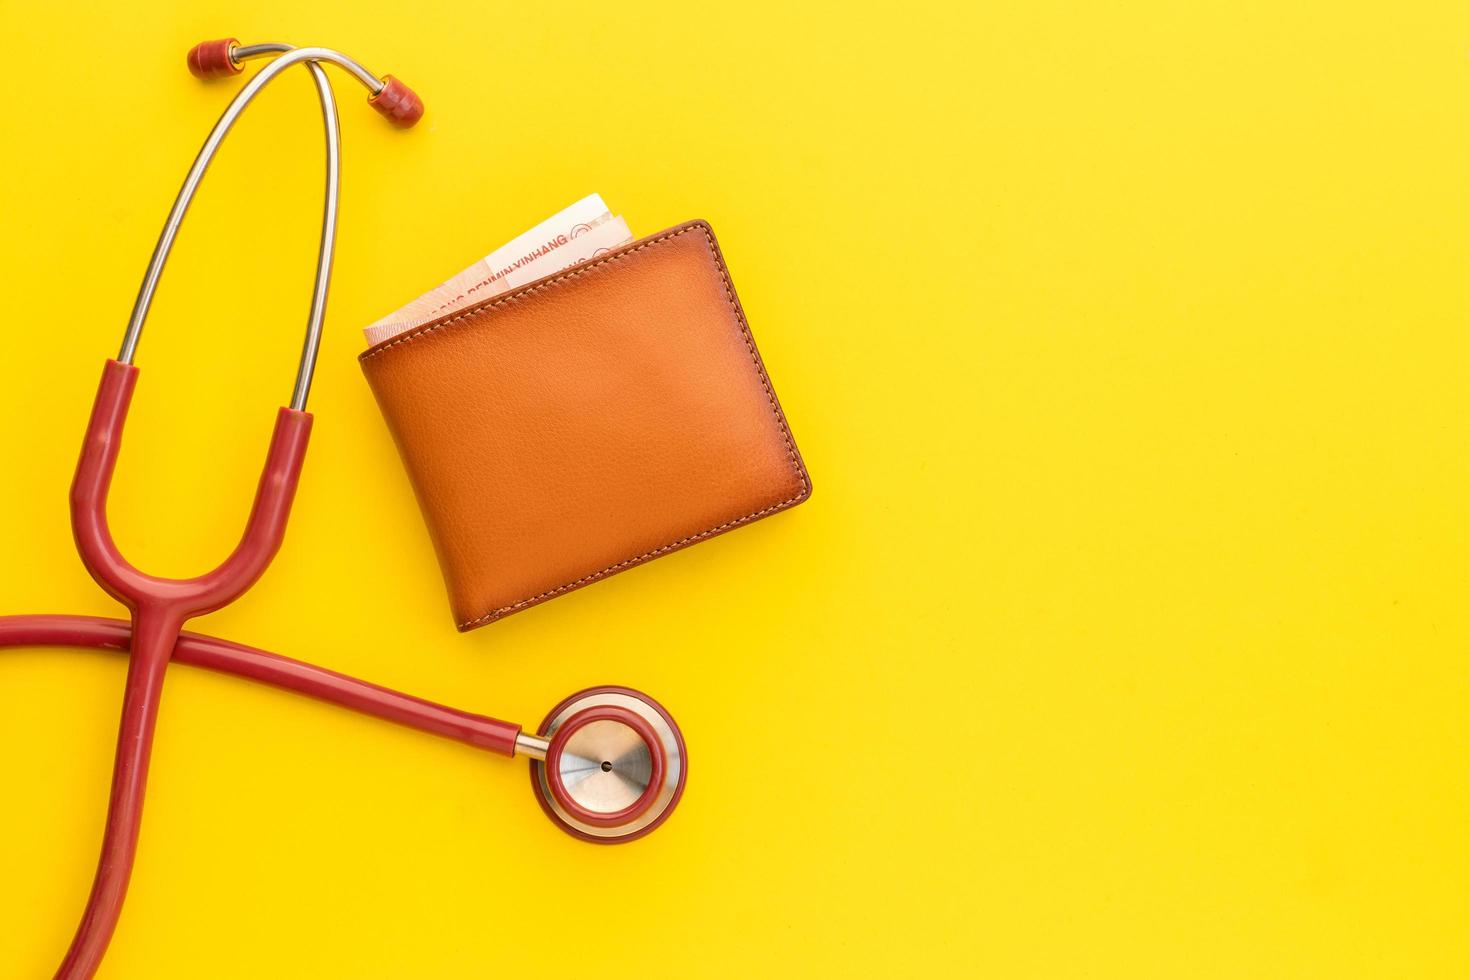 Doctor stethoscope and the new leather brown men wallet on yellow background. Budget for health check or money and financial concept photo